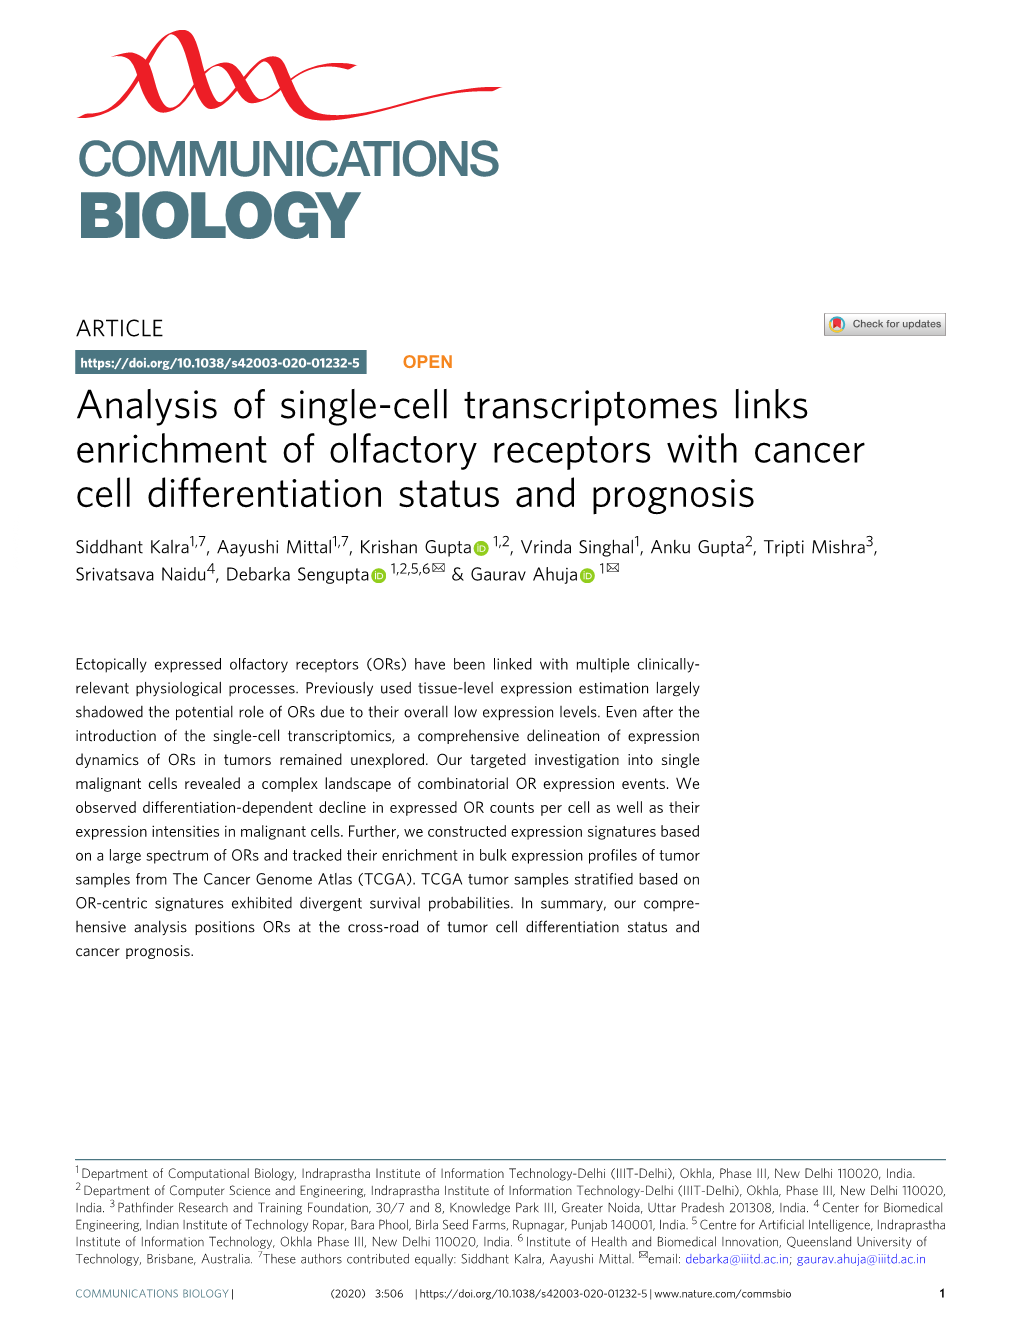 Analysis of Single-Cell Transcriptomes Links Enrichment of Olfactory Receptors with Cancer Cell Differentiation Status and Prognosis